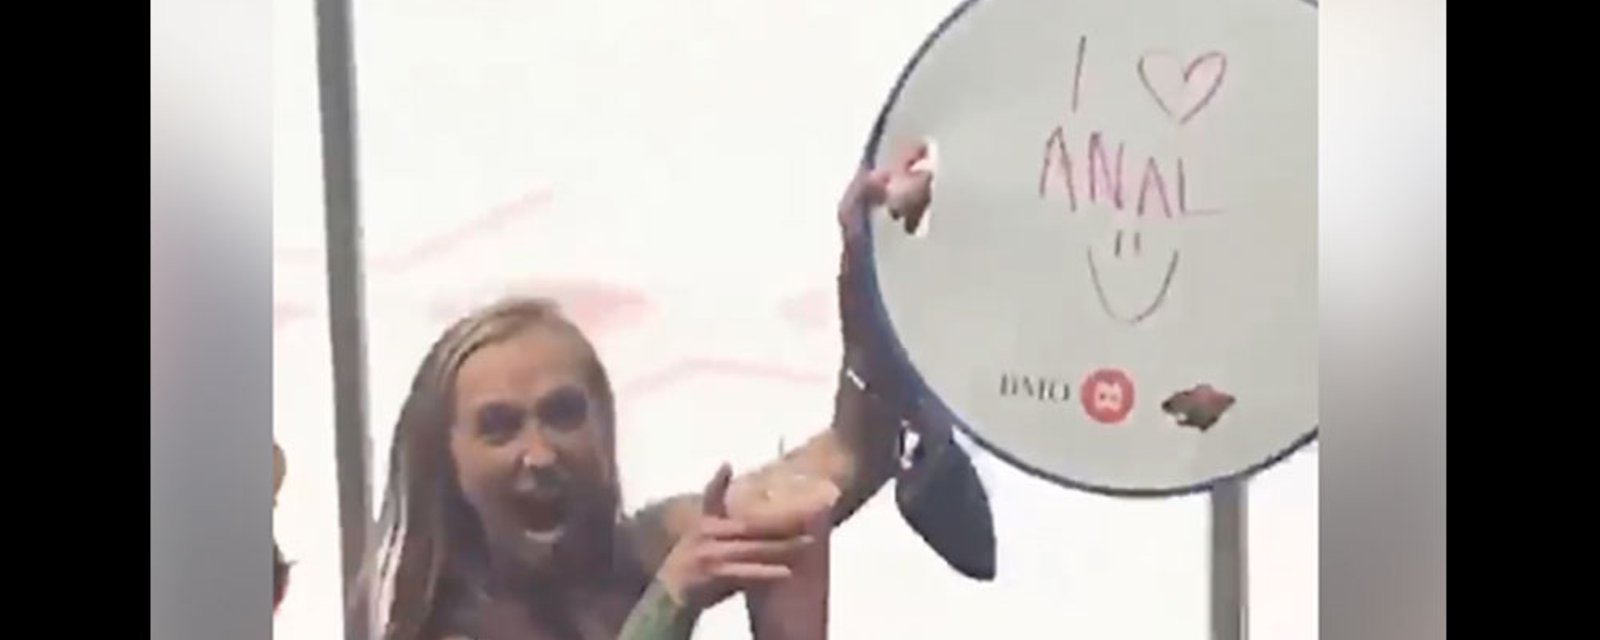 Wild fan dances in the crowd, holds up “I love anal” sign